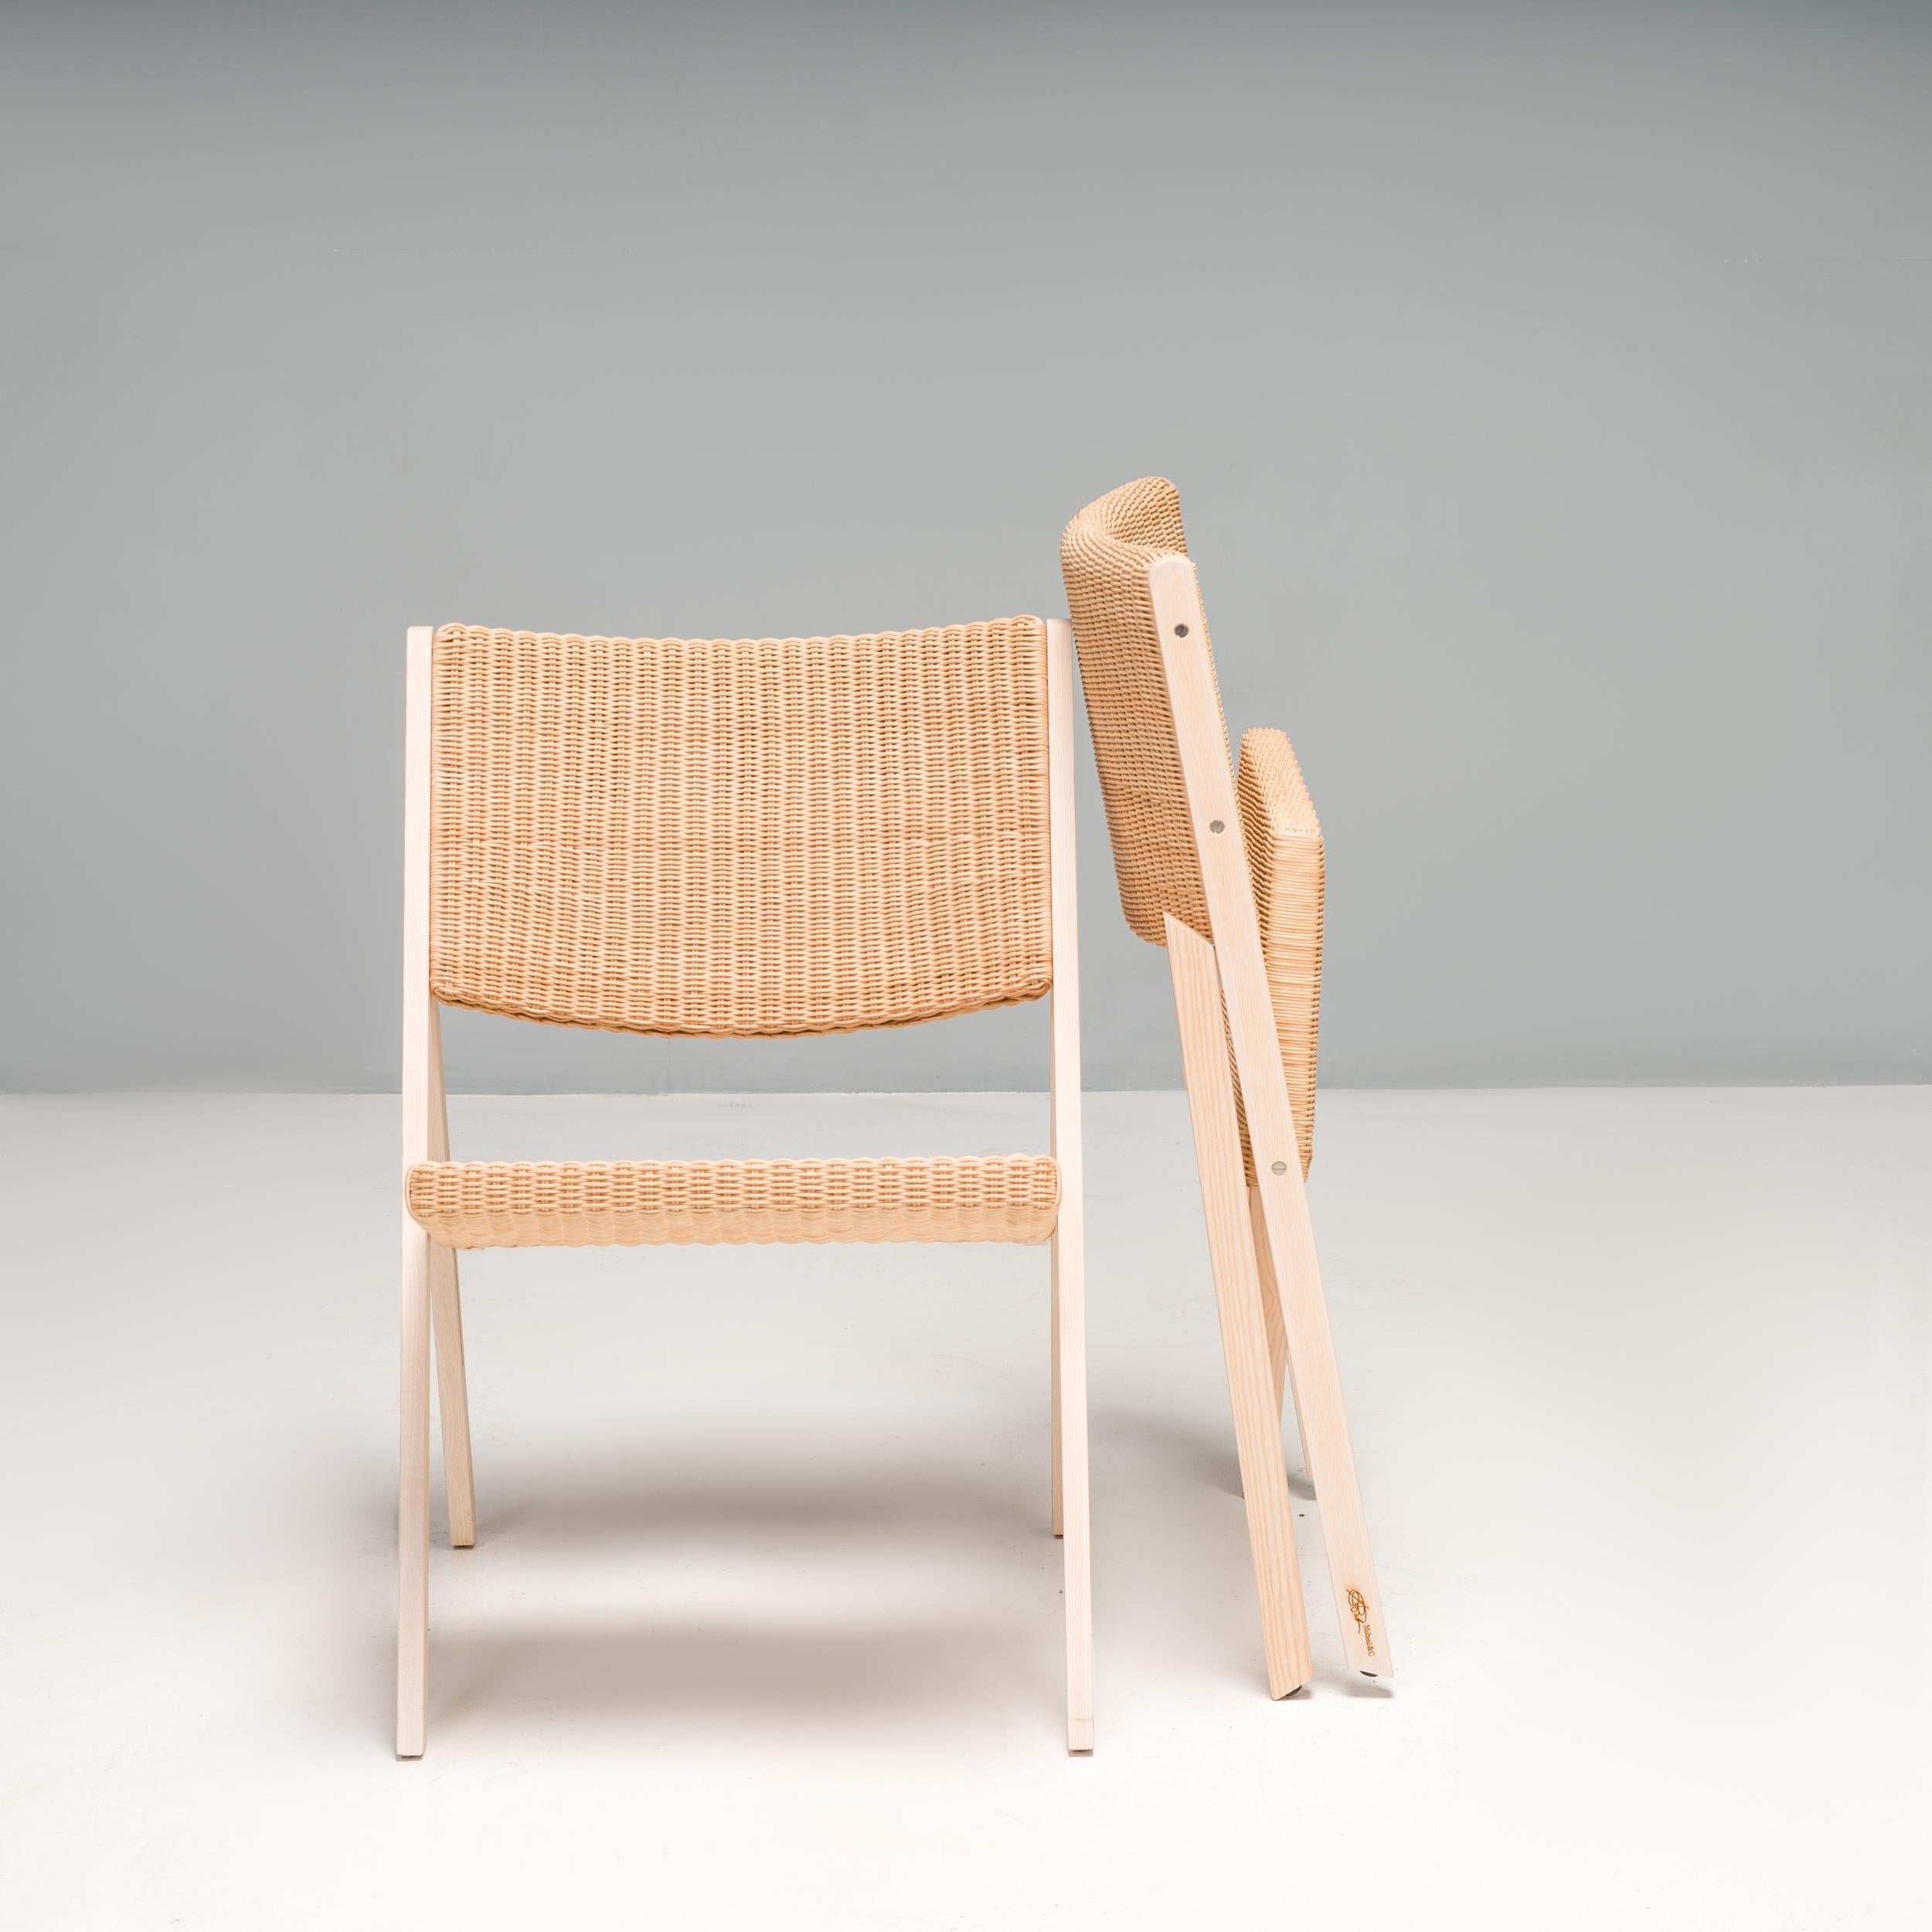 Gio Ponti for Molteni&C D.270.1 Wicker Folding Chairs, Set of 2 In Good Condition For Sale In London, GB